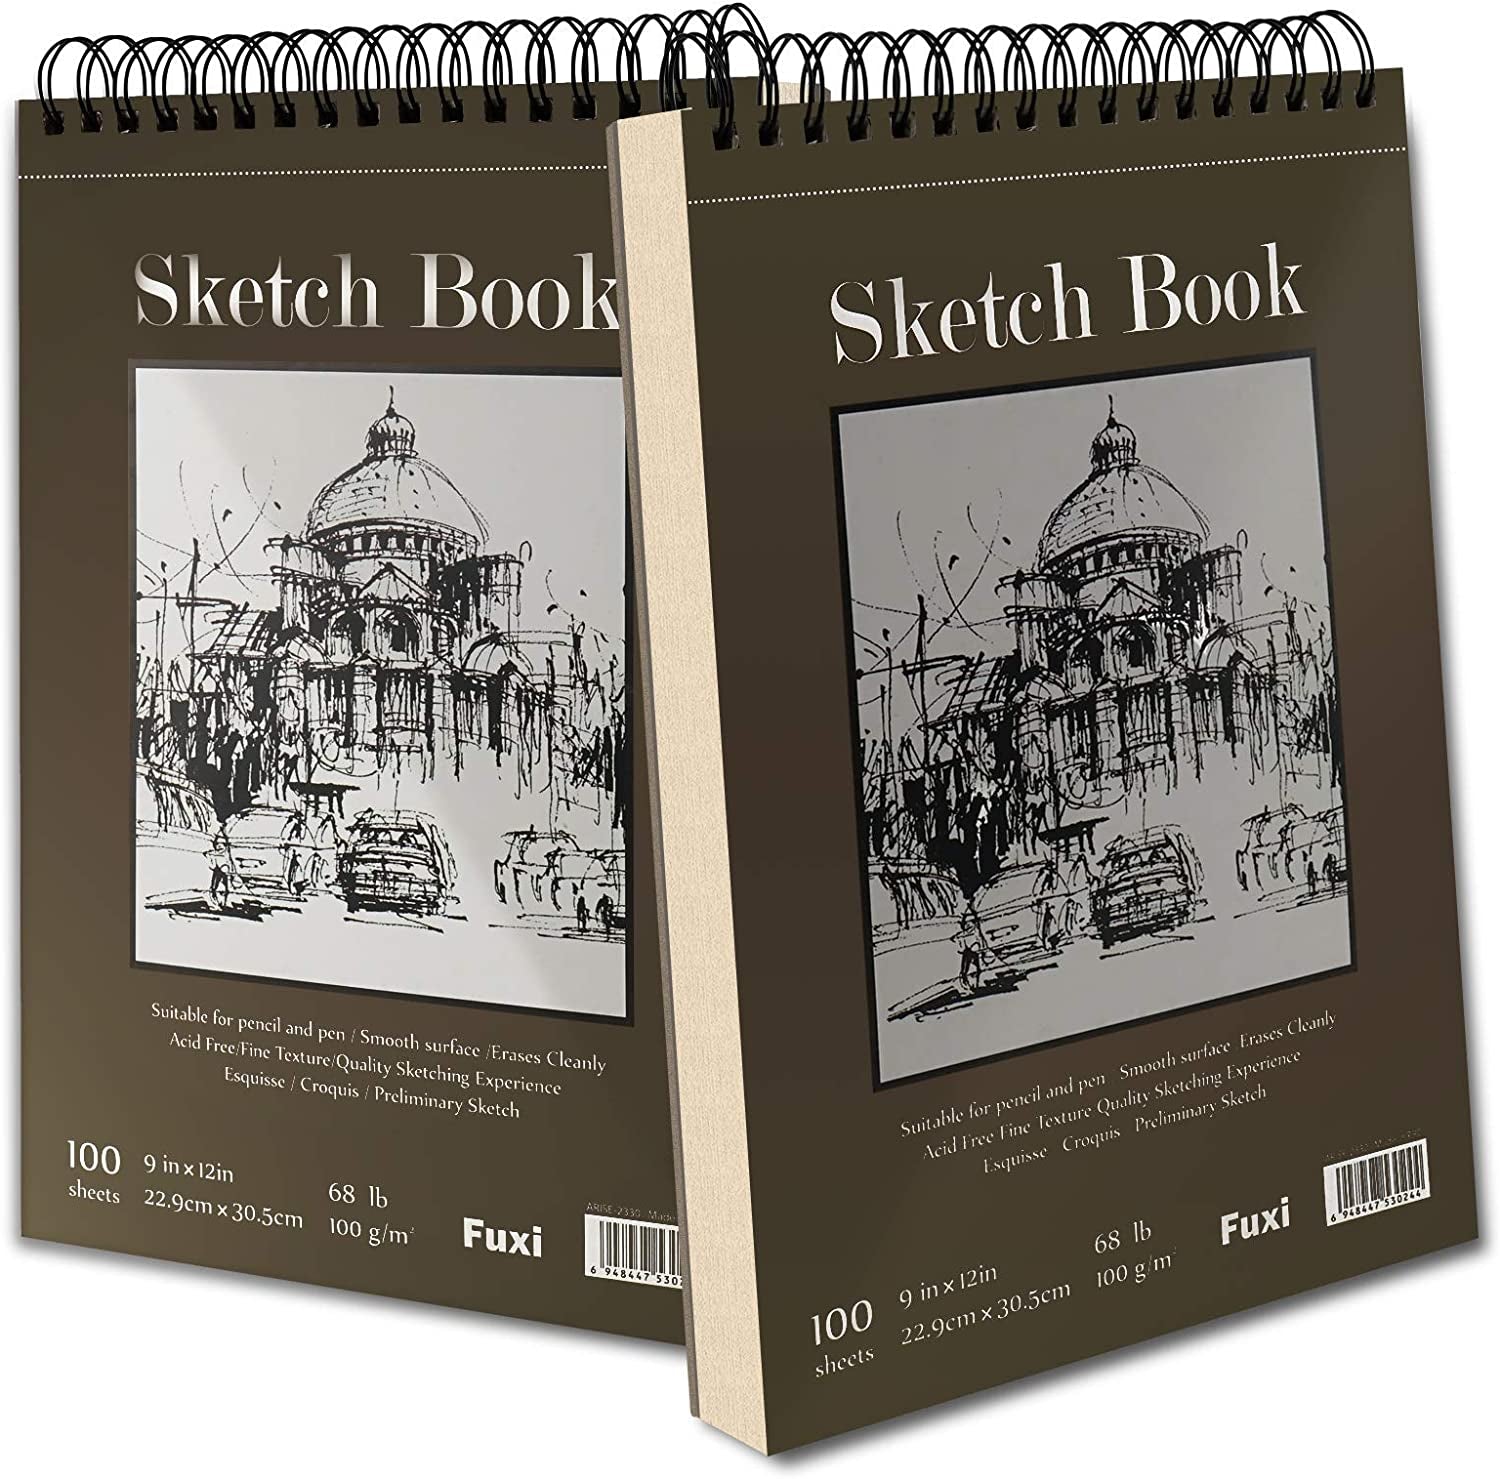 9 X 12 Inches Sketch Book, Top Spiral Bound Sketch Pad, 1 Pack 100-Sheets (68Lb/100Gsm), Acid Free Art Sketchbook Artistic Drawing Painting Writing Paper for Kids Adults Beginners Artists